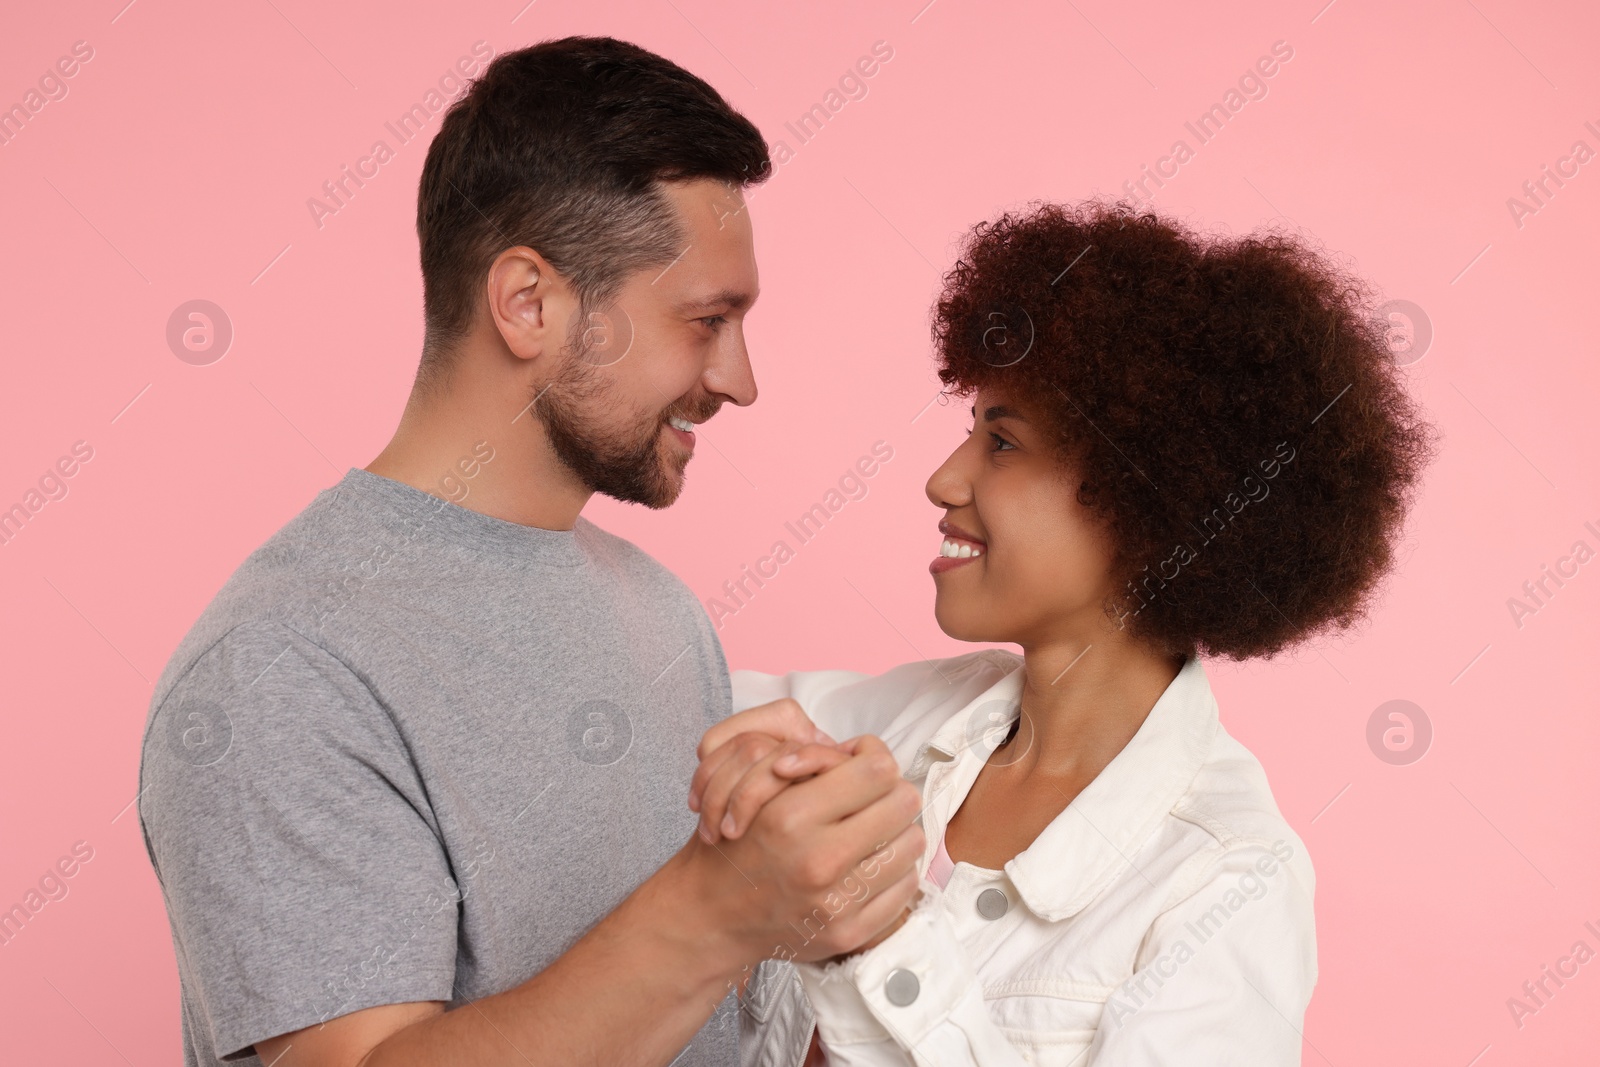 Photo of International dating. Happy couple dancing on pink background